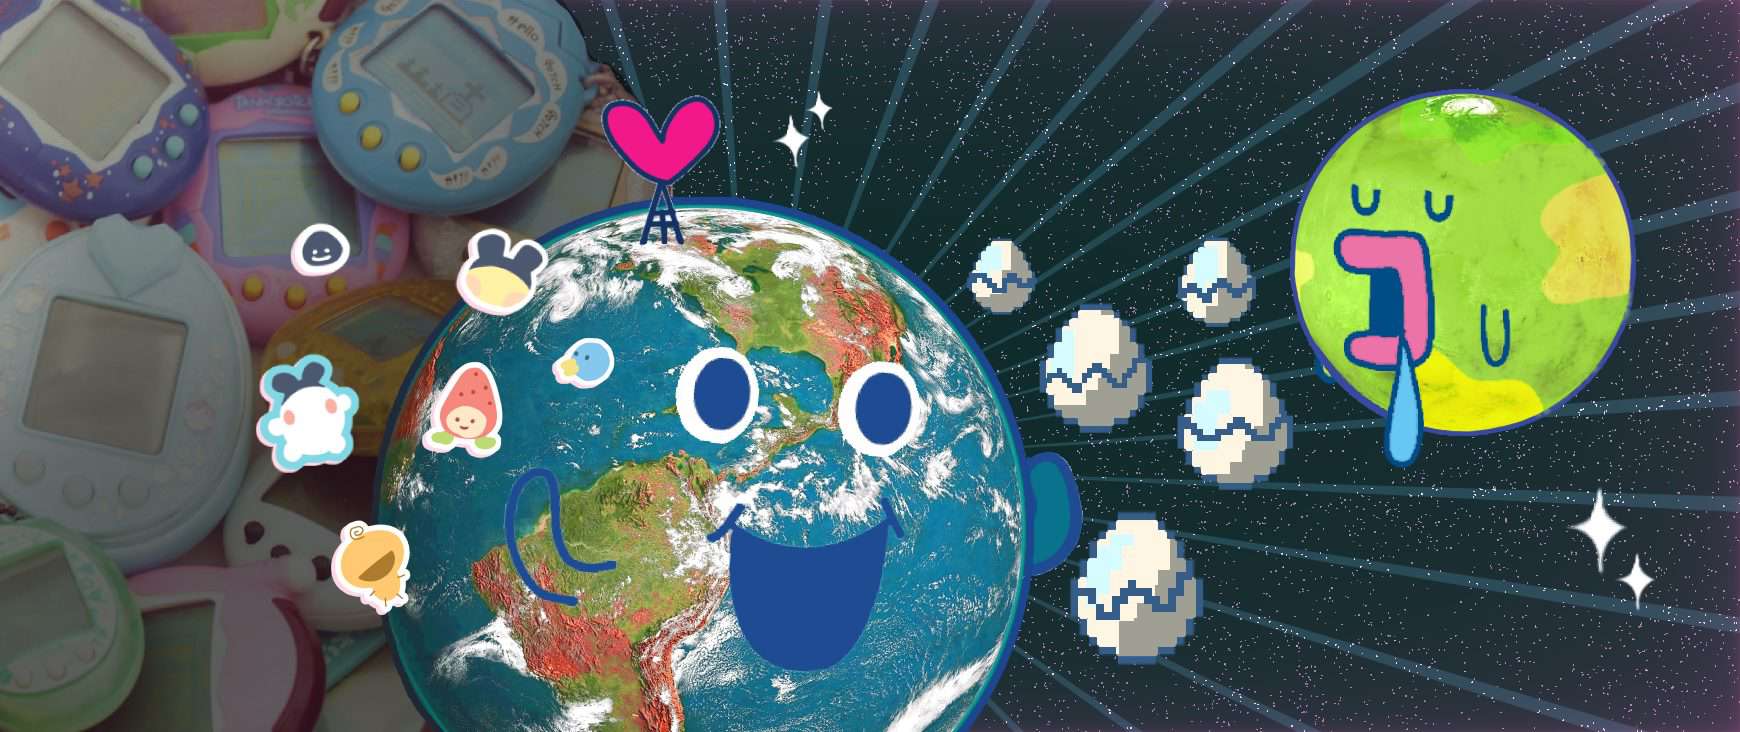 Aliens coming to earth from Tamagotchi planet 